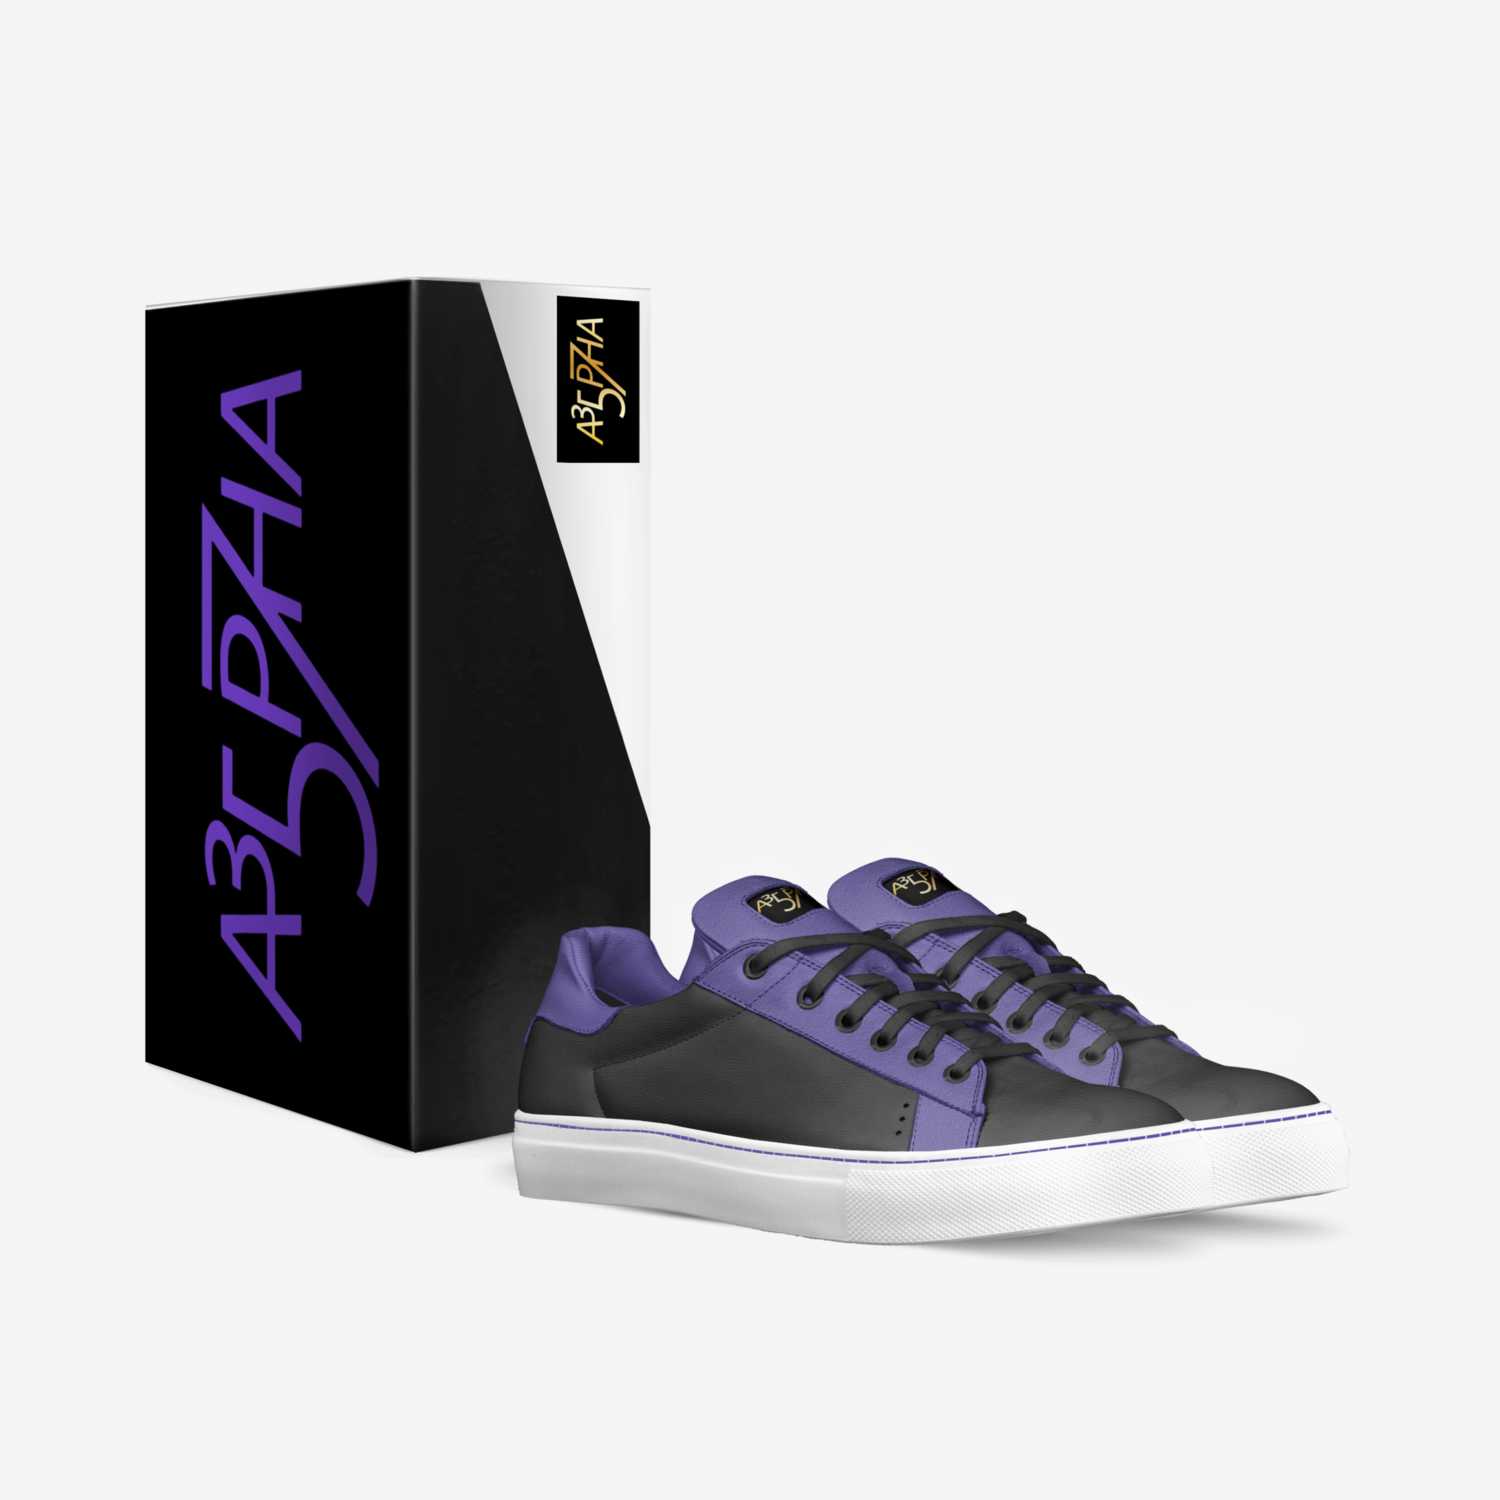 Alpha Poetic custom made in Italy shoes by Aldric Horton Jr | Box view